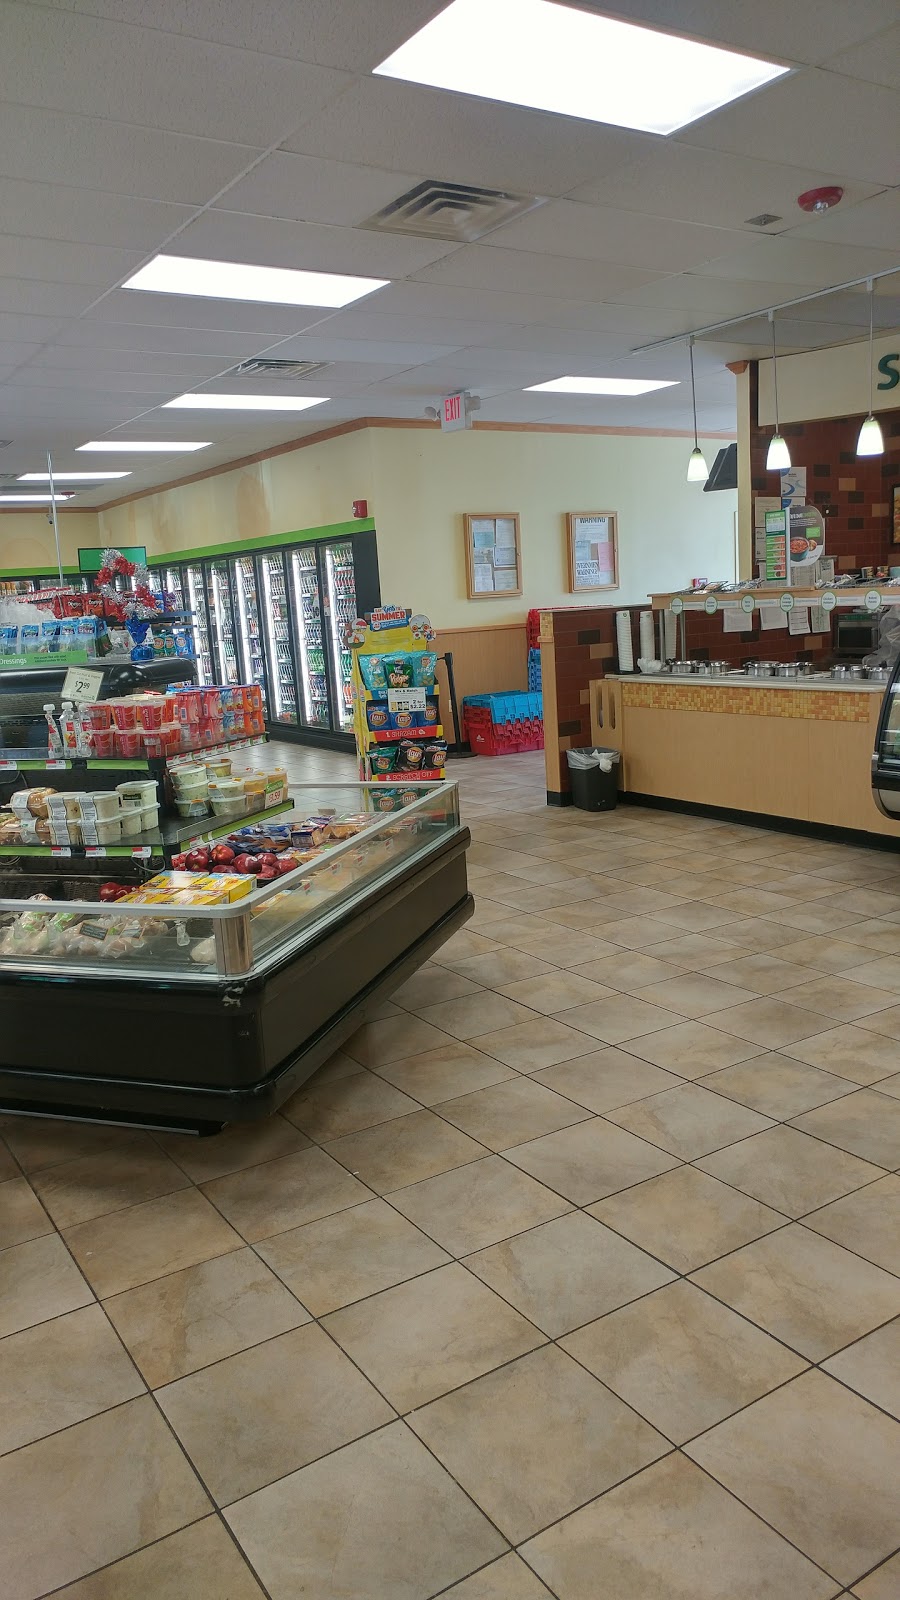 QuickChek | 751-753 Route 211 East, NY-211, Middletown, NY 10941 | Phone: (845) 692-2871